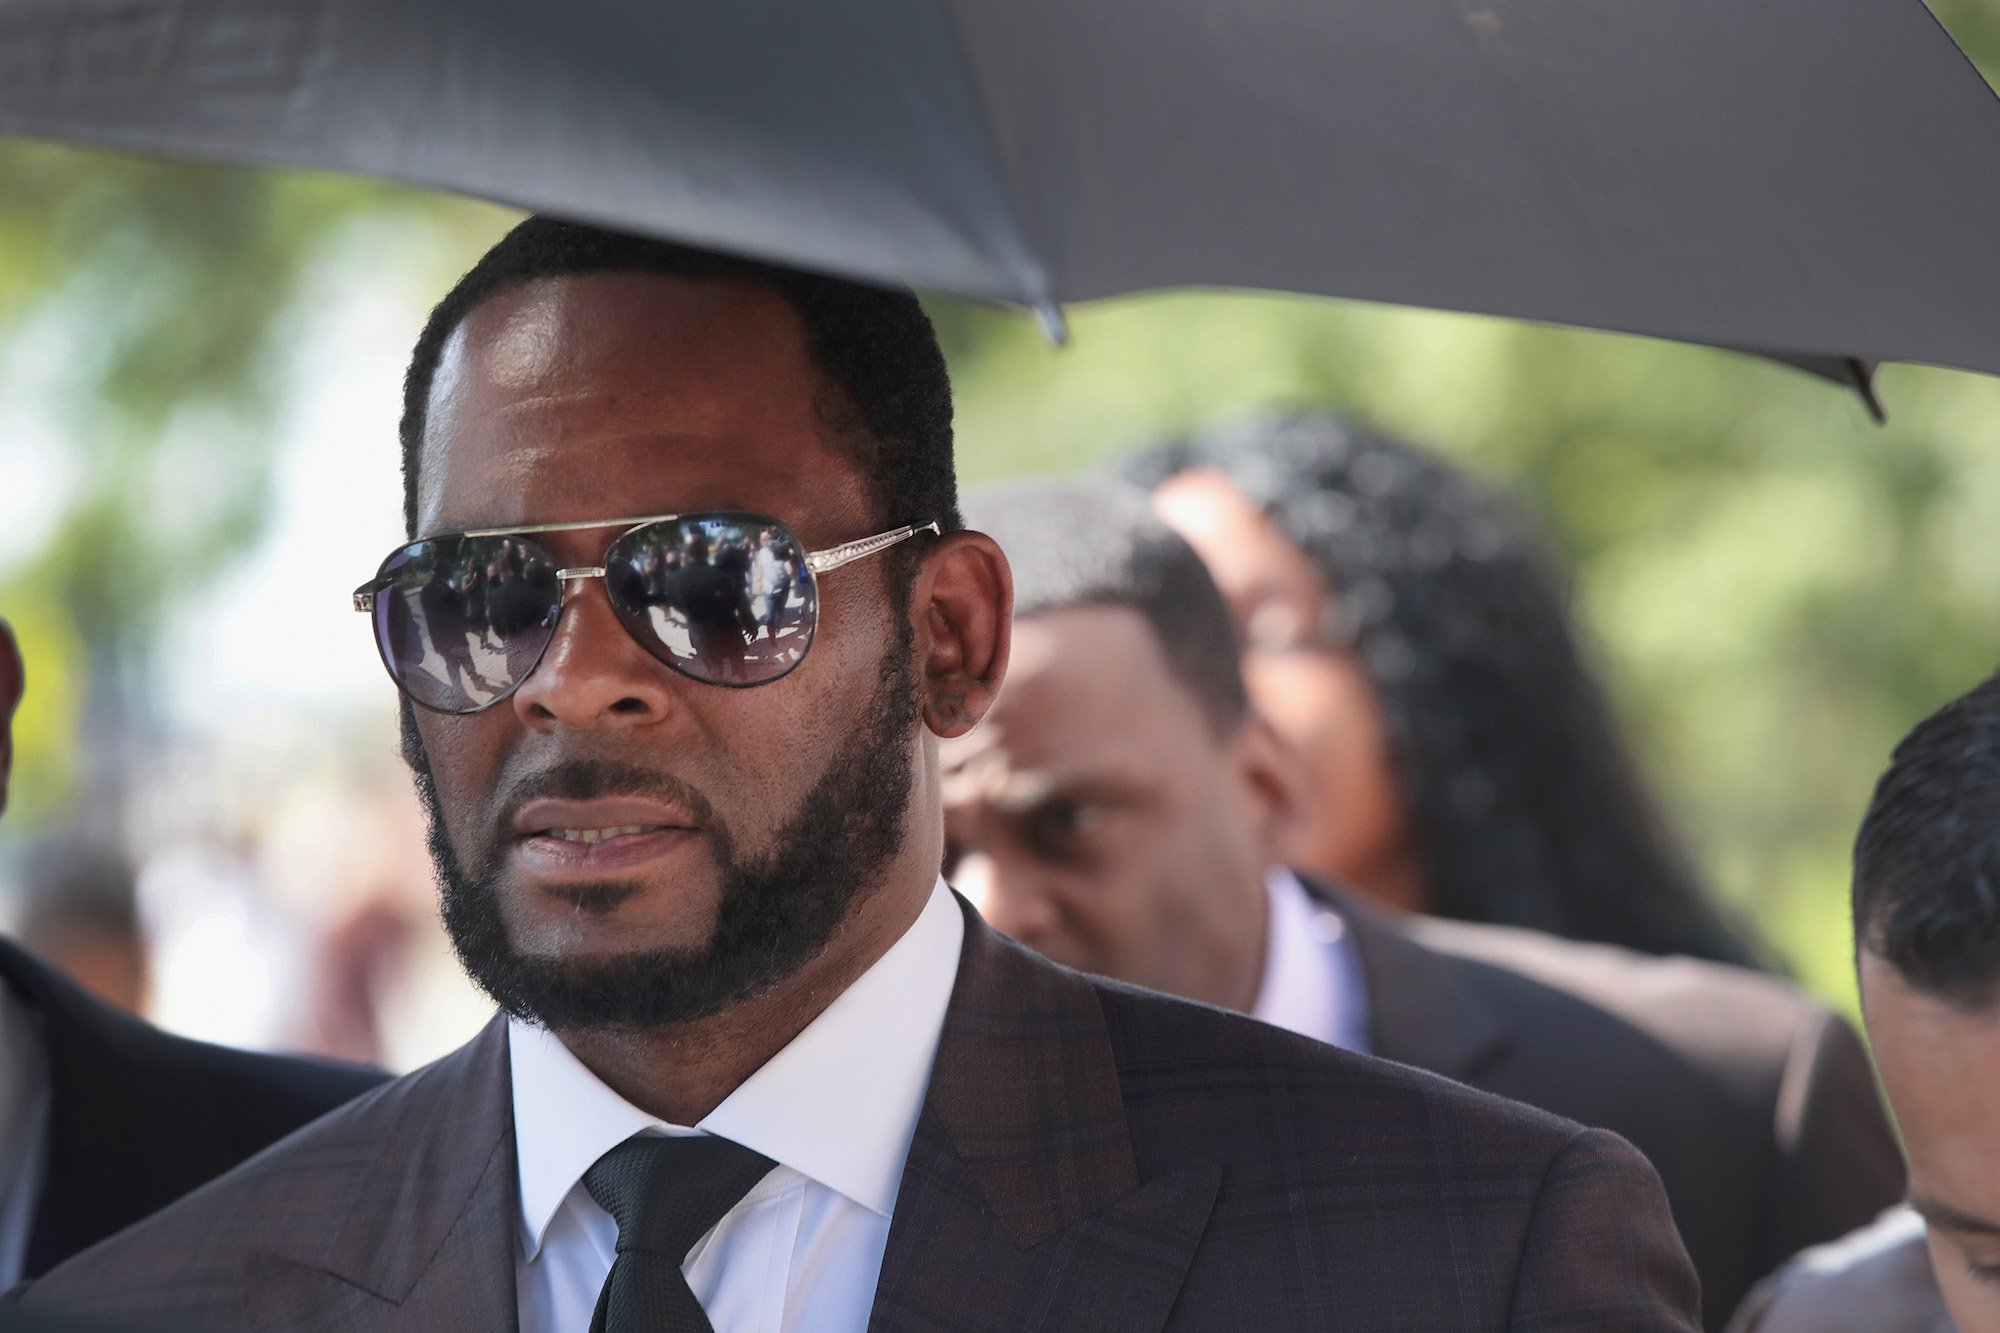 R. Kelly stands under an umbrella on his way to court